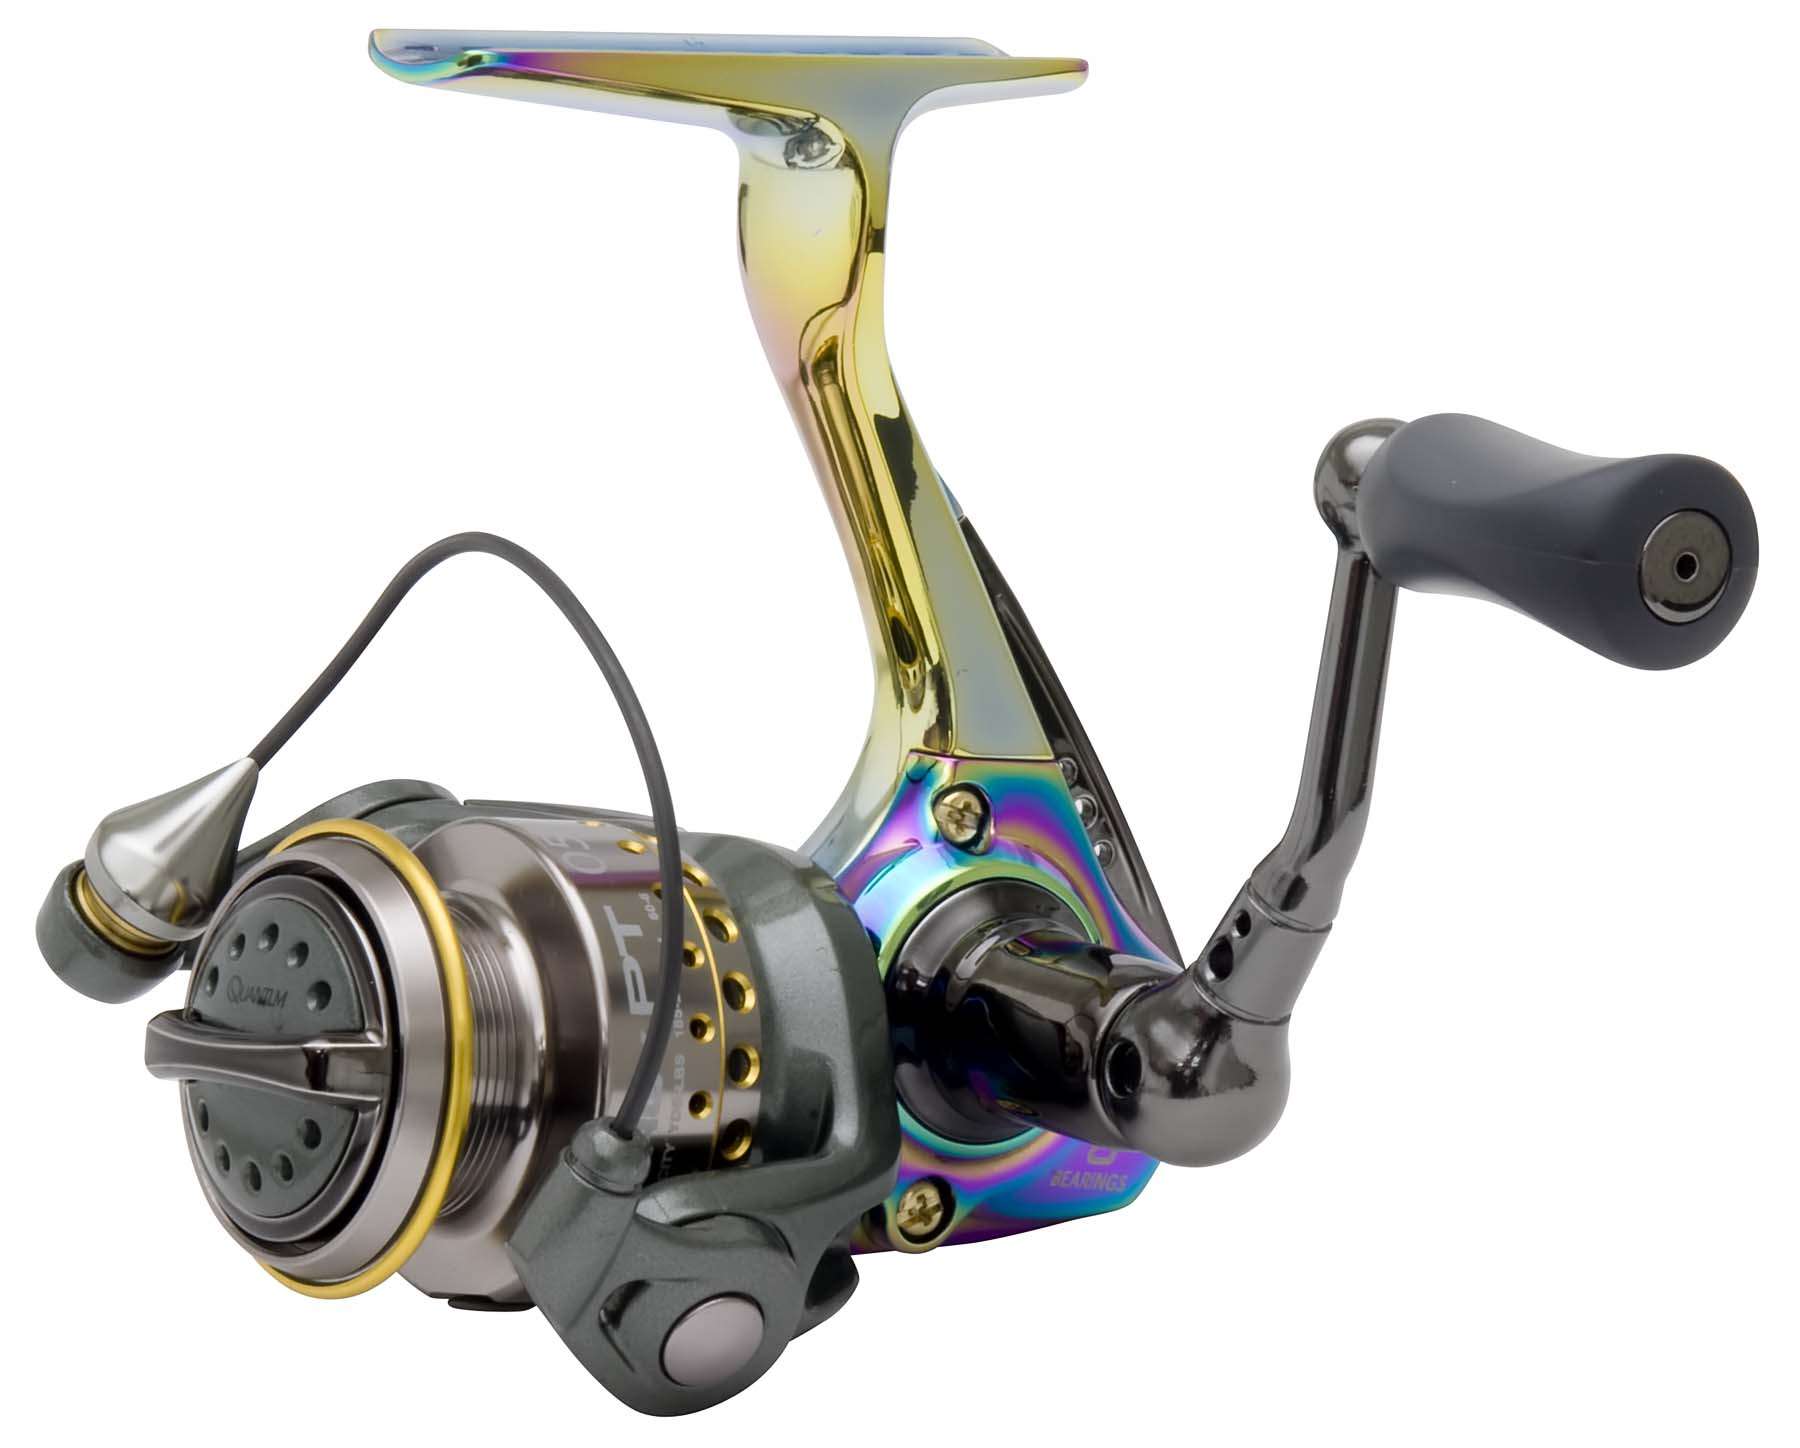 Quantum Energy Micro PT<br>Quantum's latest spinning outfit offering gives you all the advantages of a full-size reel in a micro package. A 5.3:1 ratio, 8 ball bearings, ceramic drag and 6-ounce curb weight make it the ultimate ultra-light spinning reel.